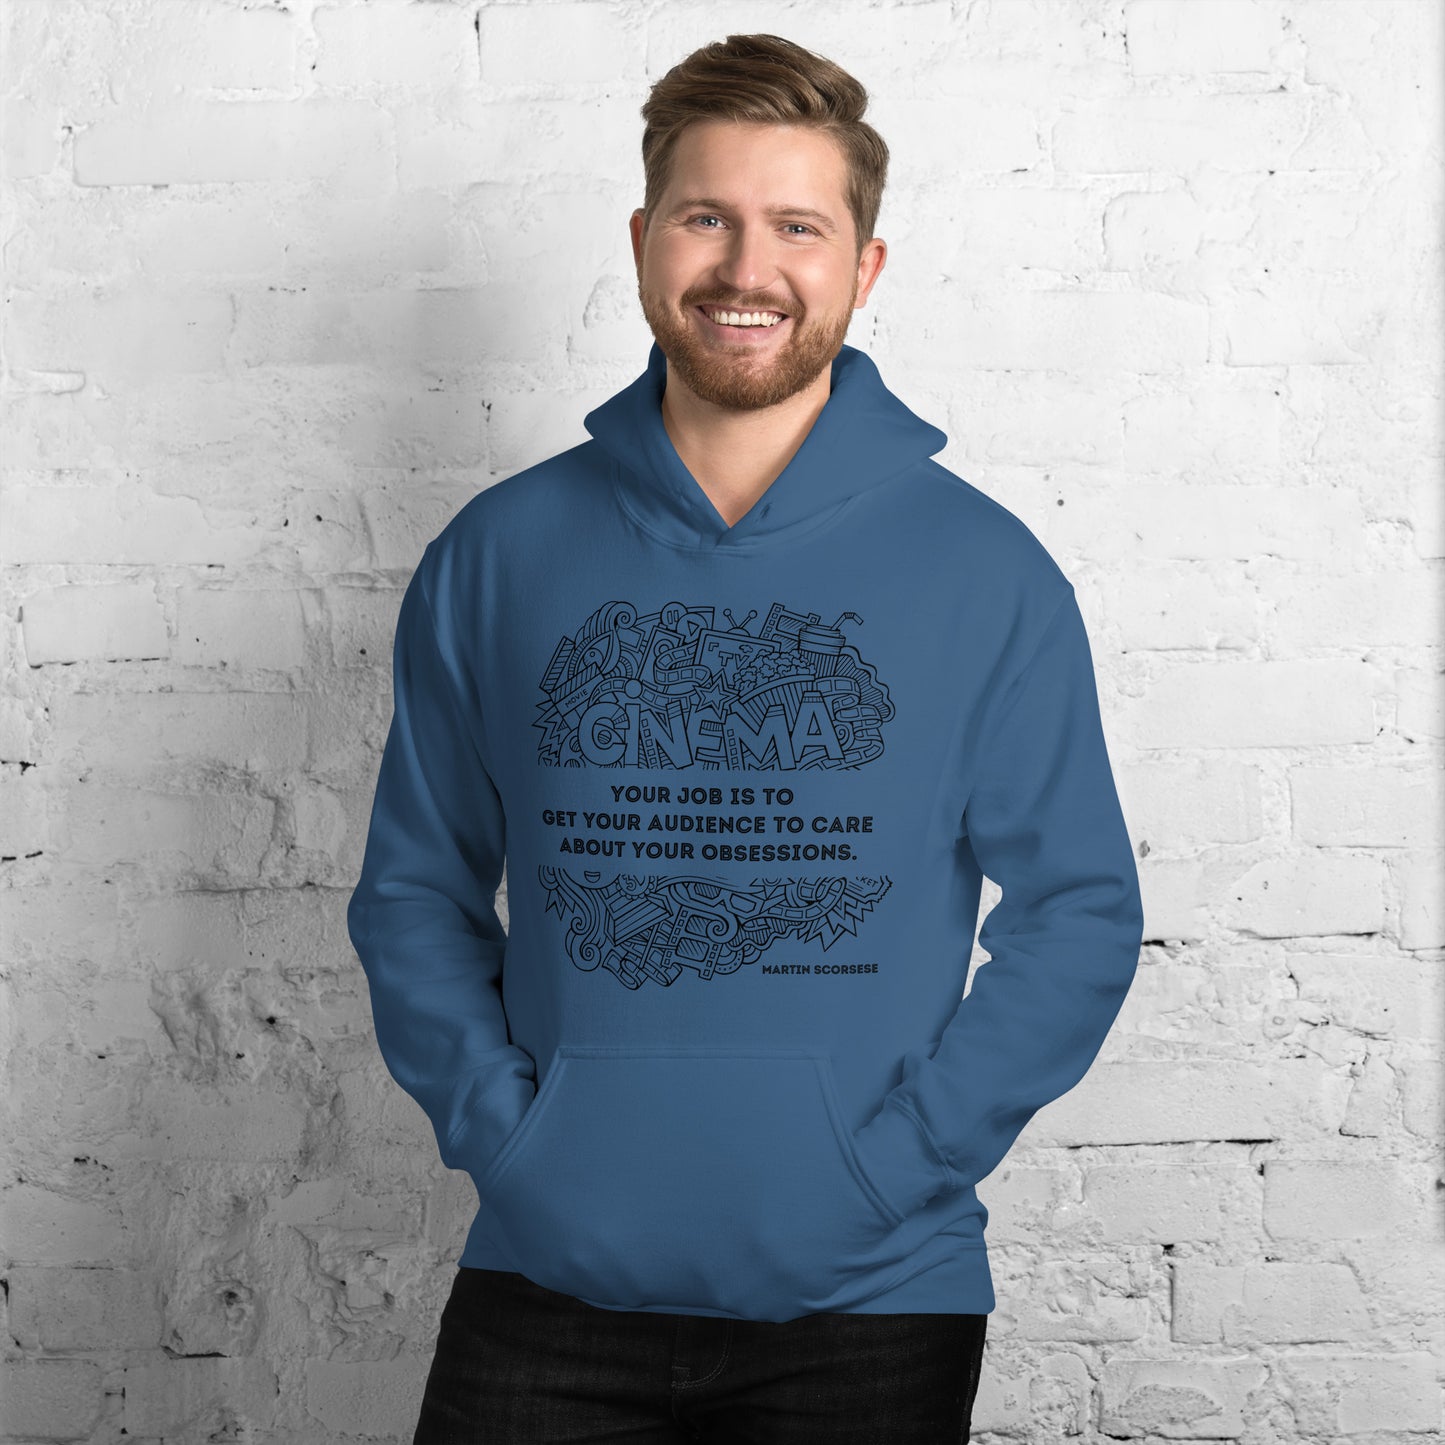 Your Job Is to Get Your Audience to Care About Your Obsessions, Quote Unisex Hoodie, Martin Scorsese